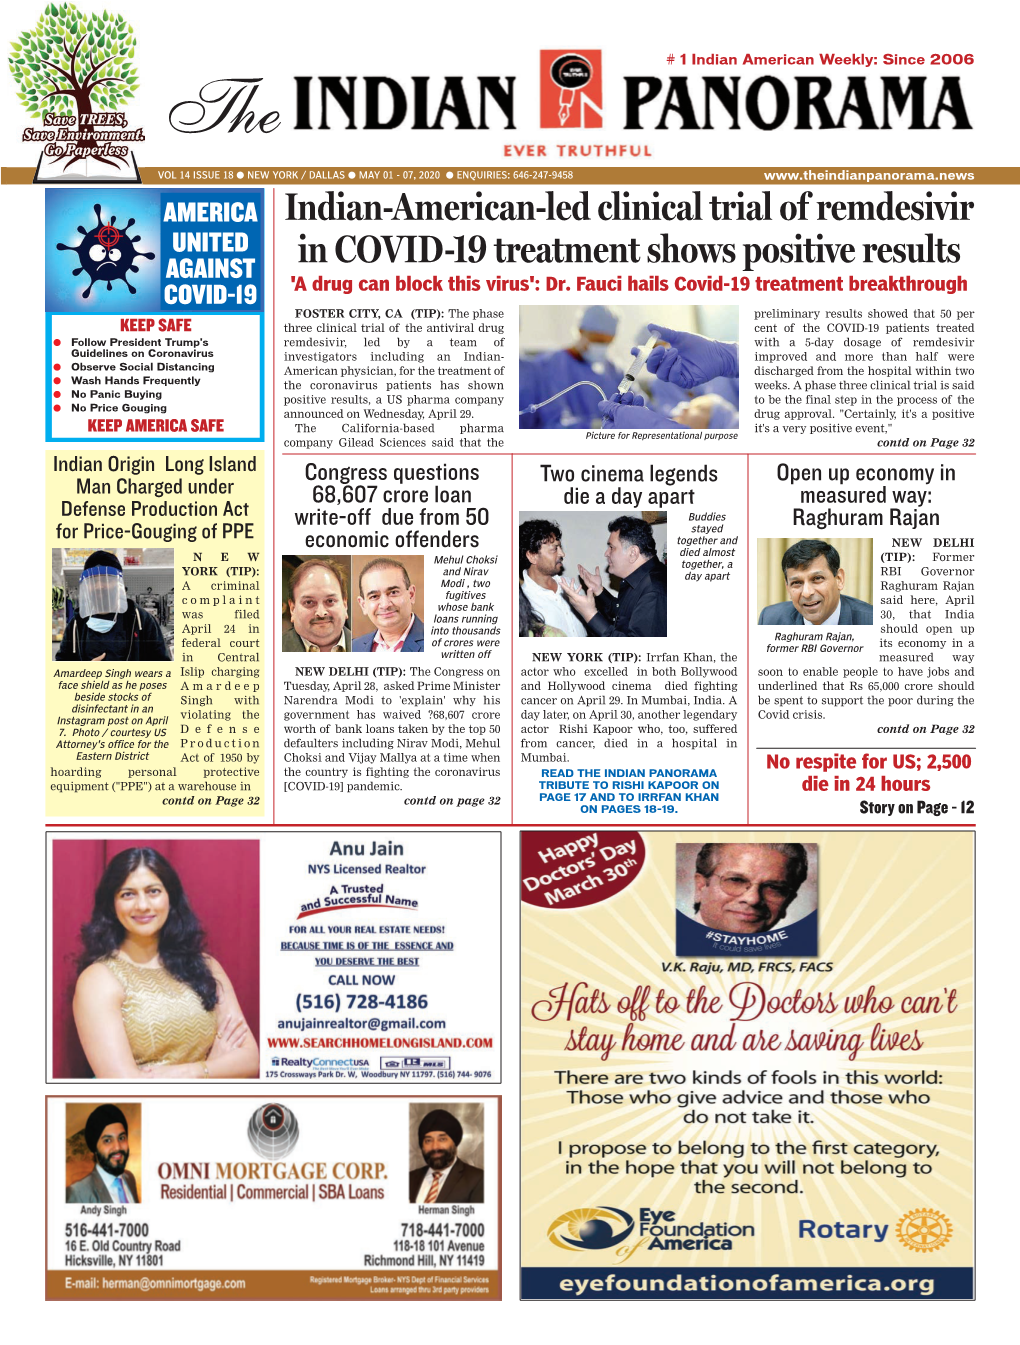 Indian-American-Led Clinical Trial of Remdesivir in COVID-19 Treatment